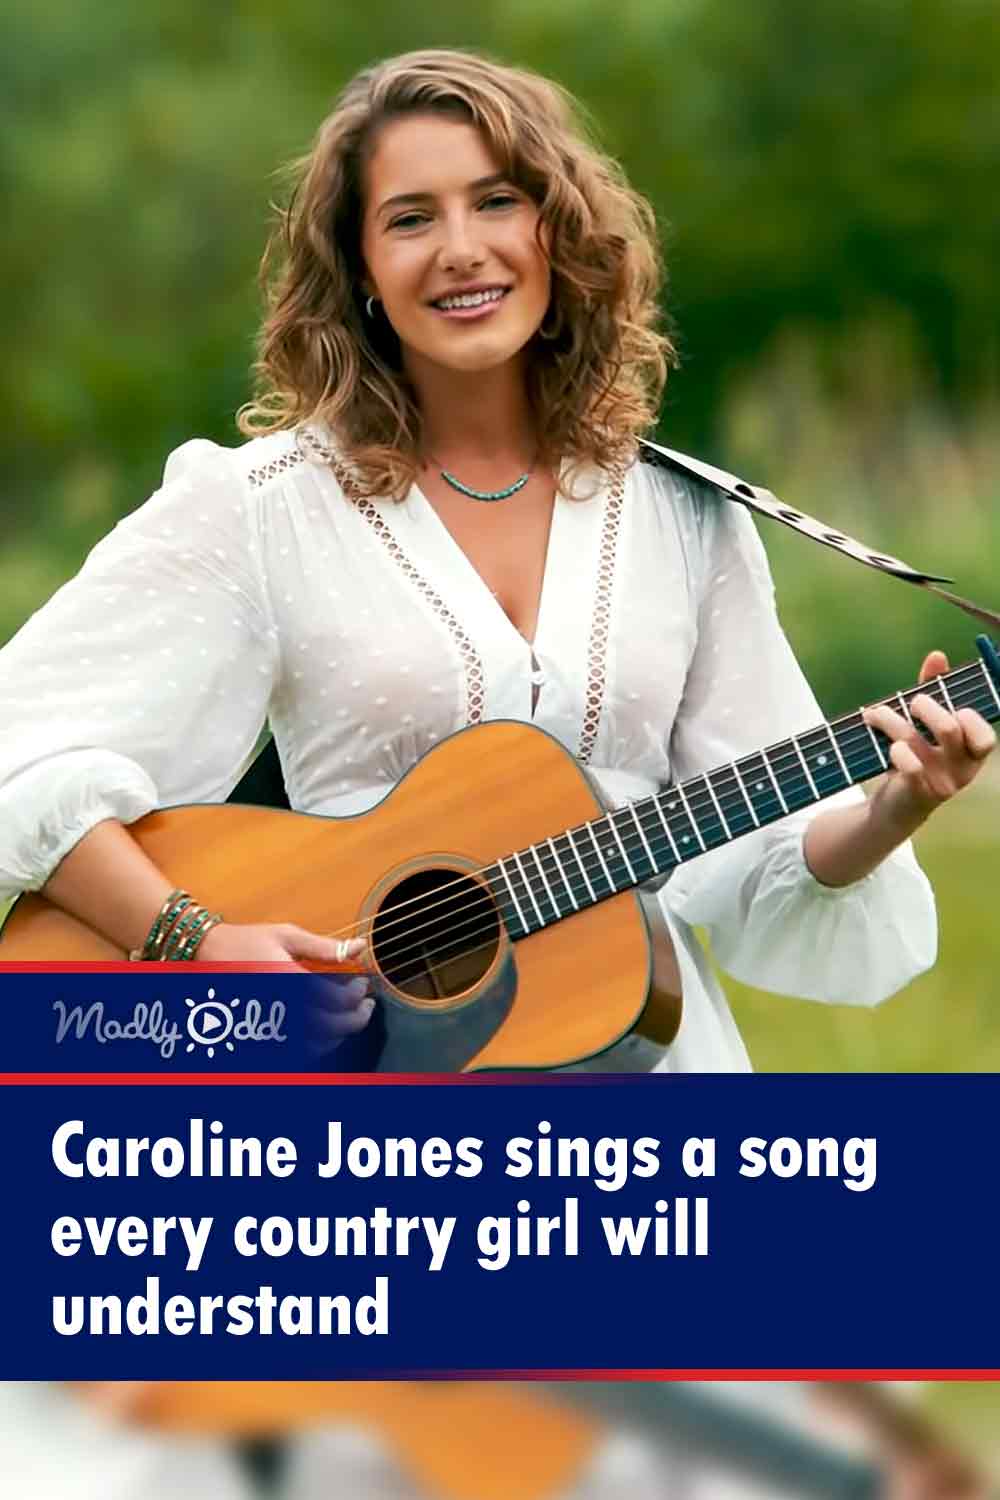 Caroline Jones sings a song every country girl will understand